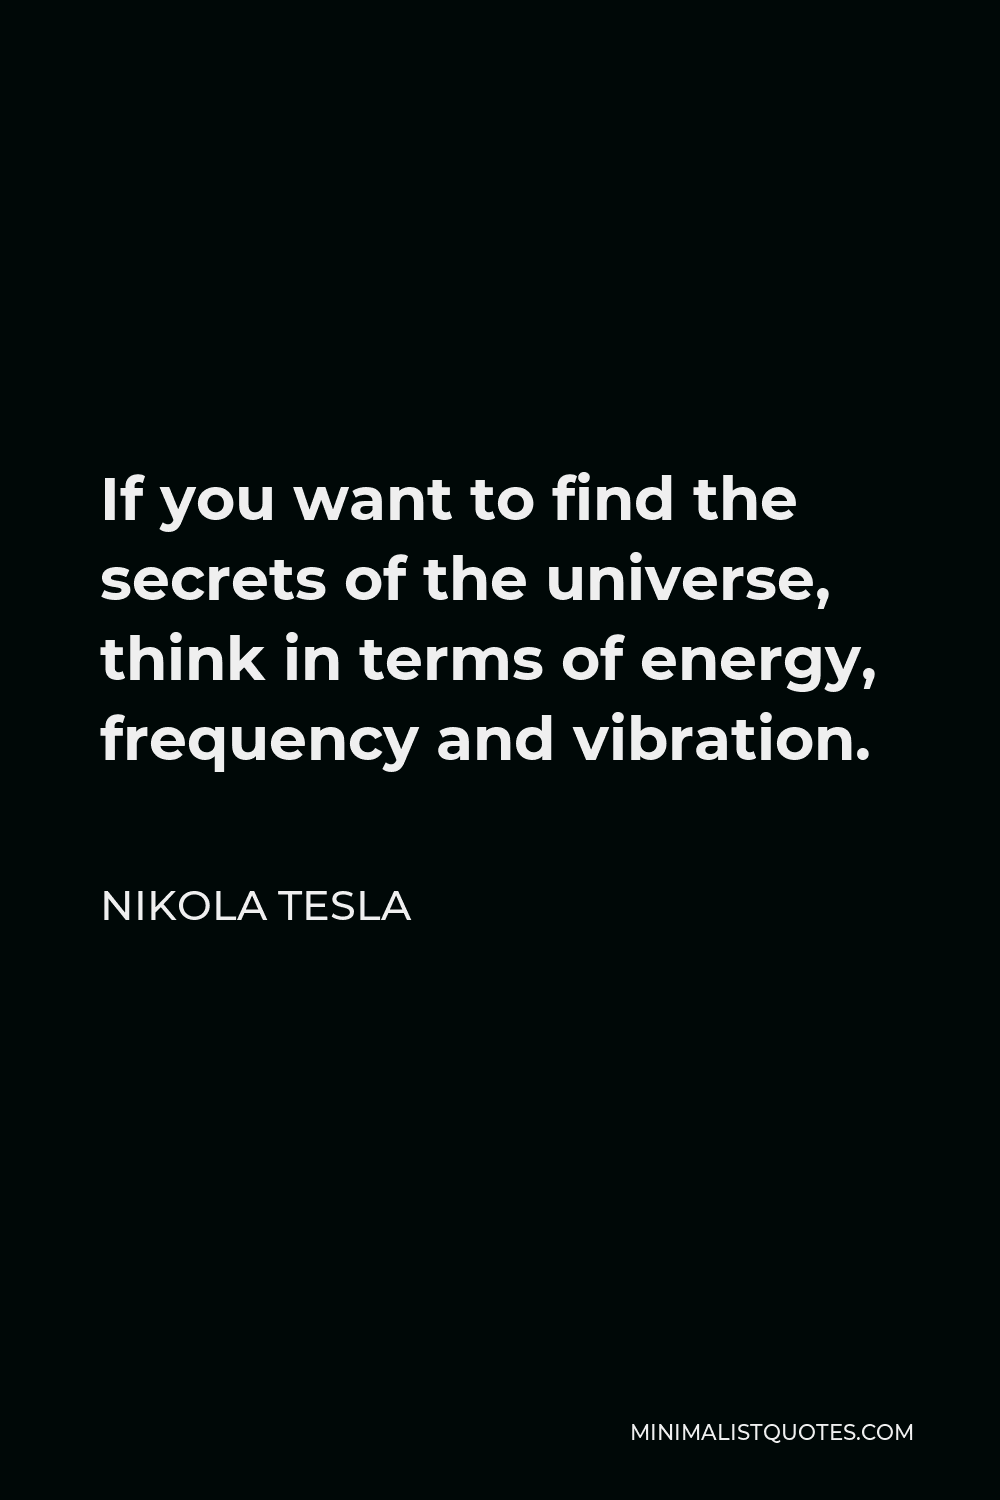 Nikola Tesla Quote - If you want to find the secrets of the universe, think in terms of energy, frequency and vibration.